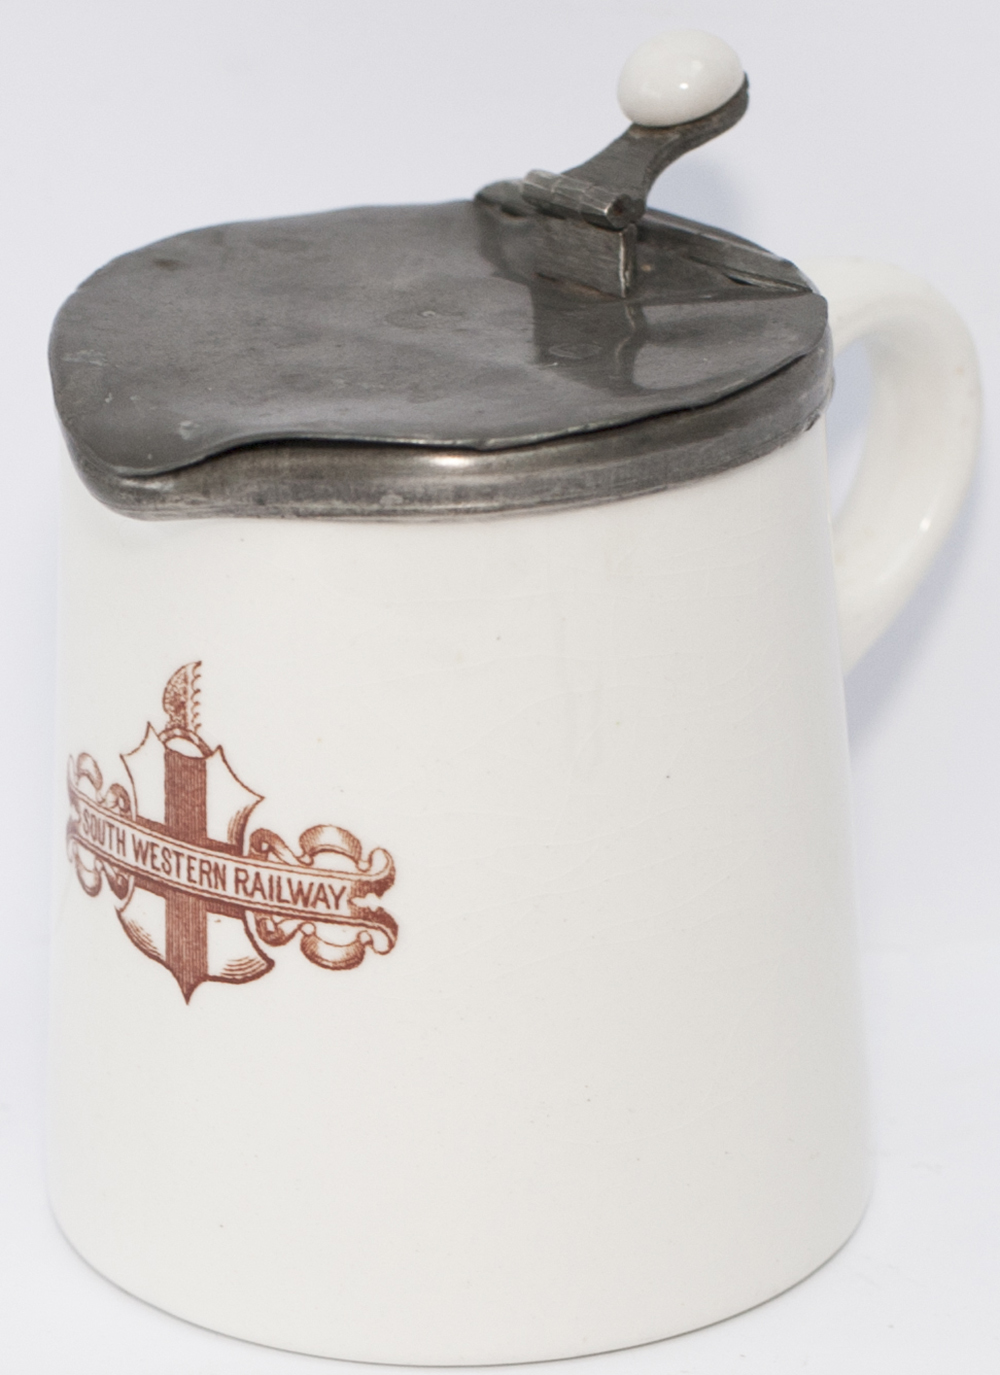 London & South Western Railway cream jug with pewter lid, marked on the front South Western Railway.